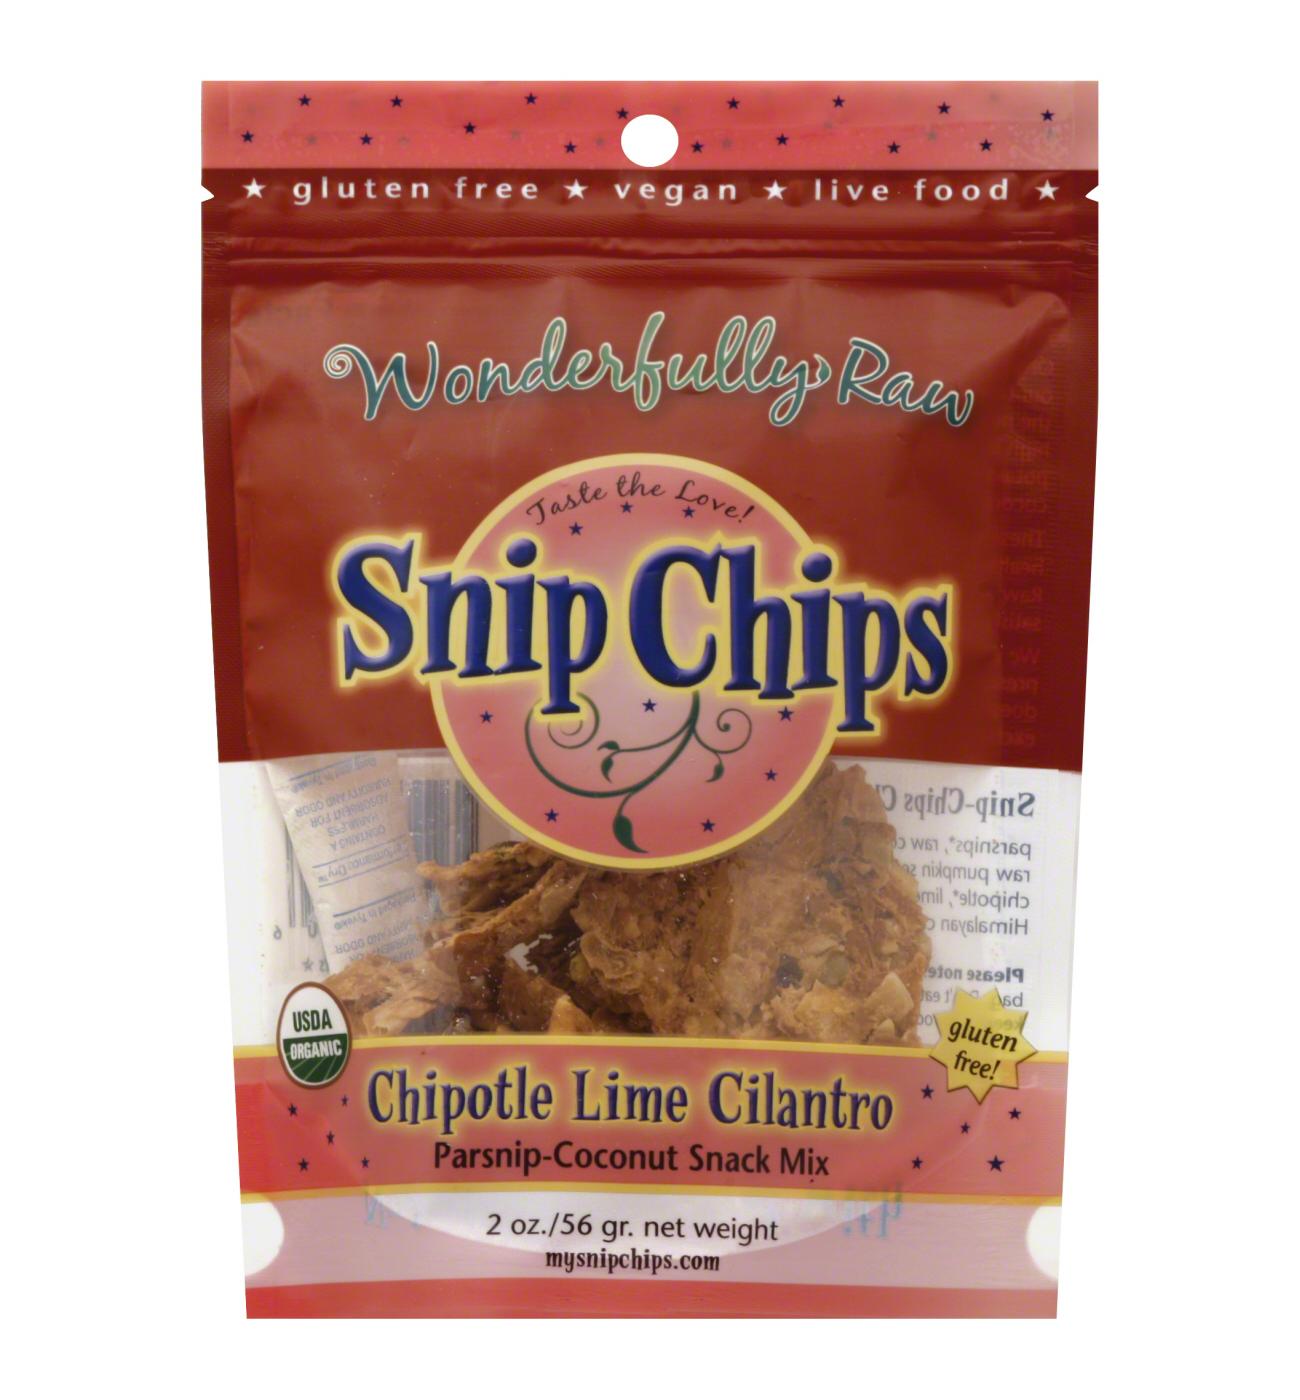 Snip Chips Wonderfully Raw Chipotle Lime Cilantro; image 2 of 2